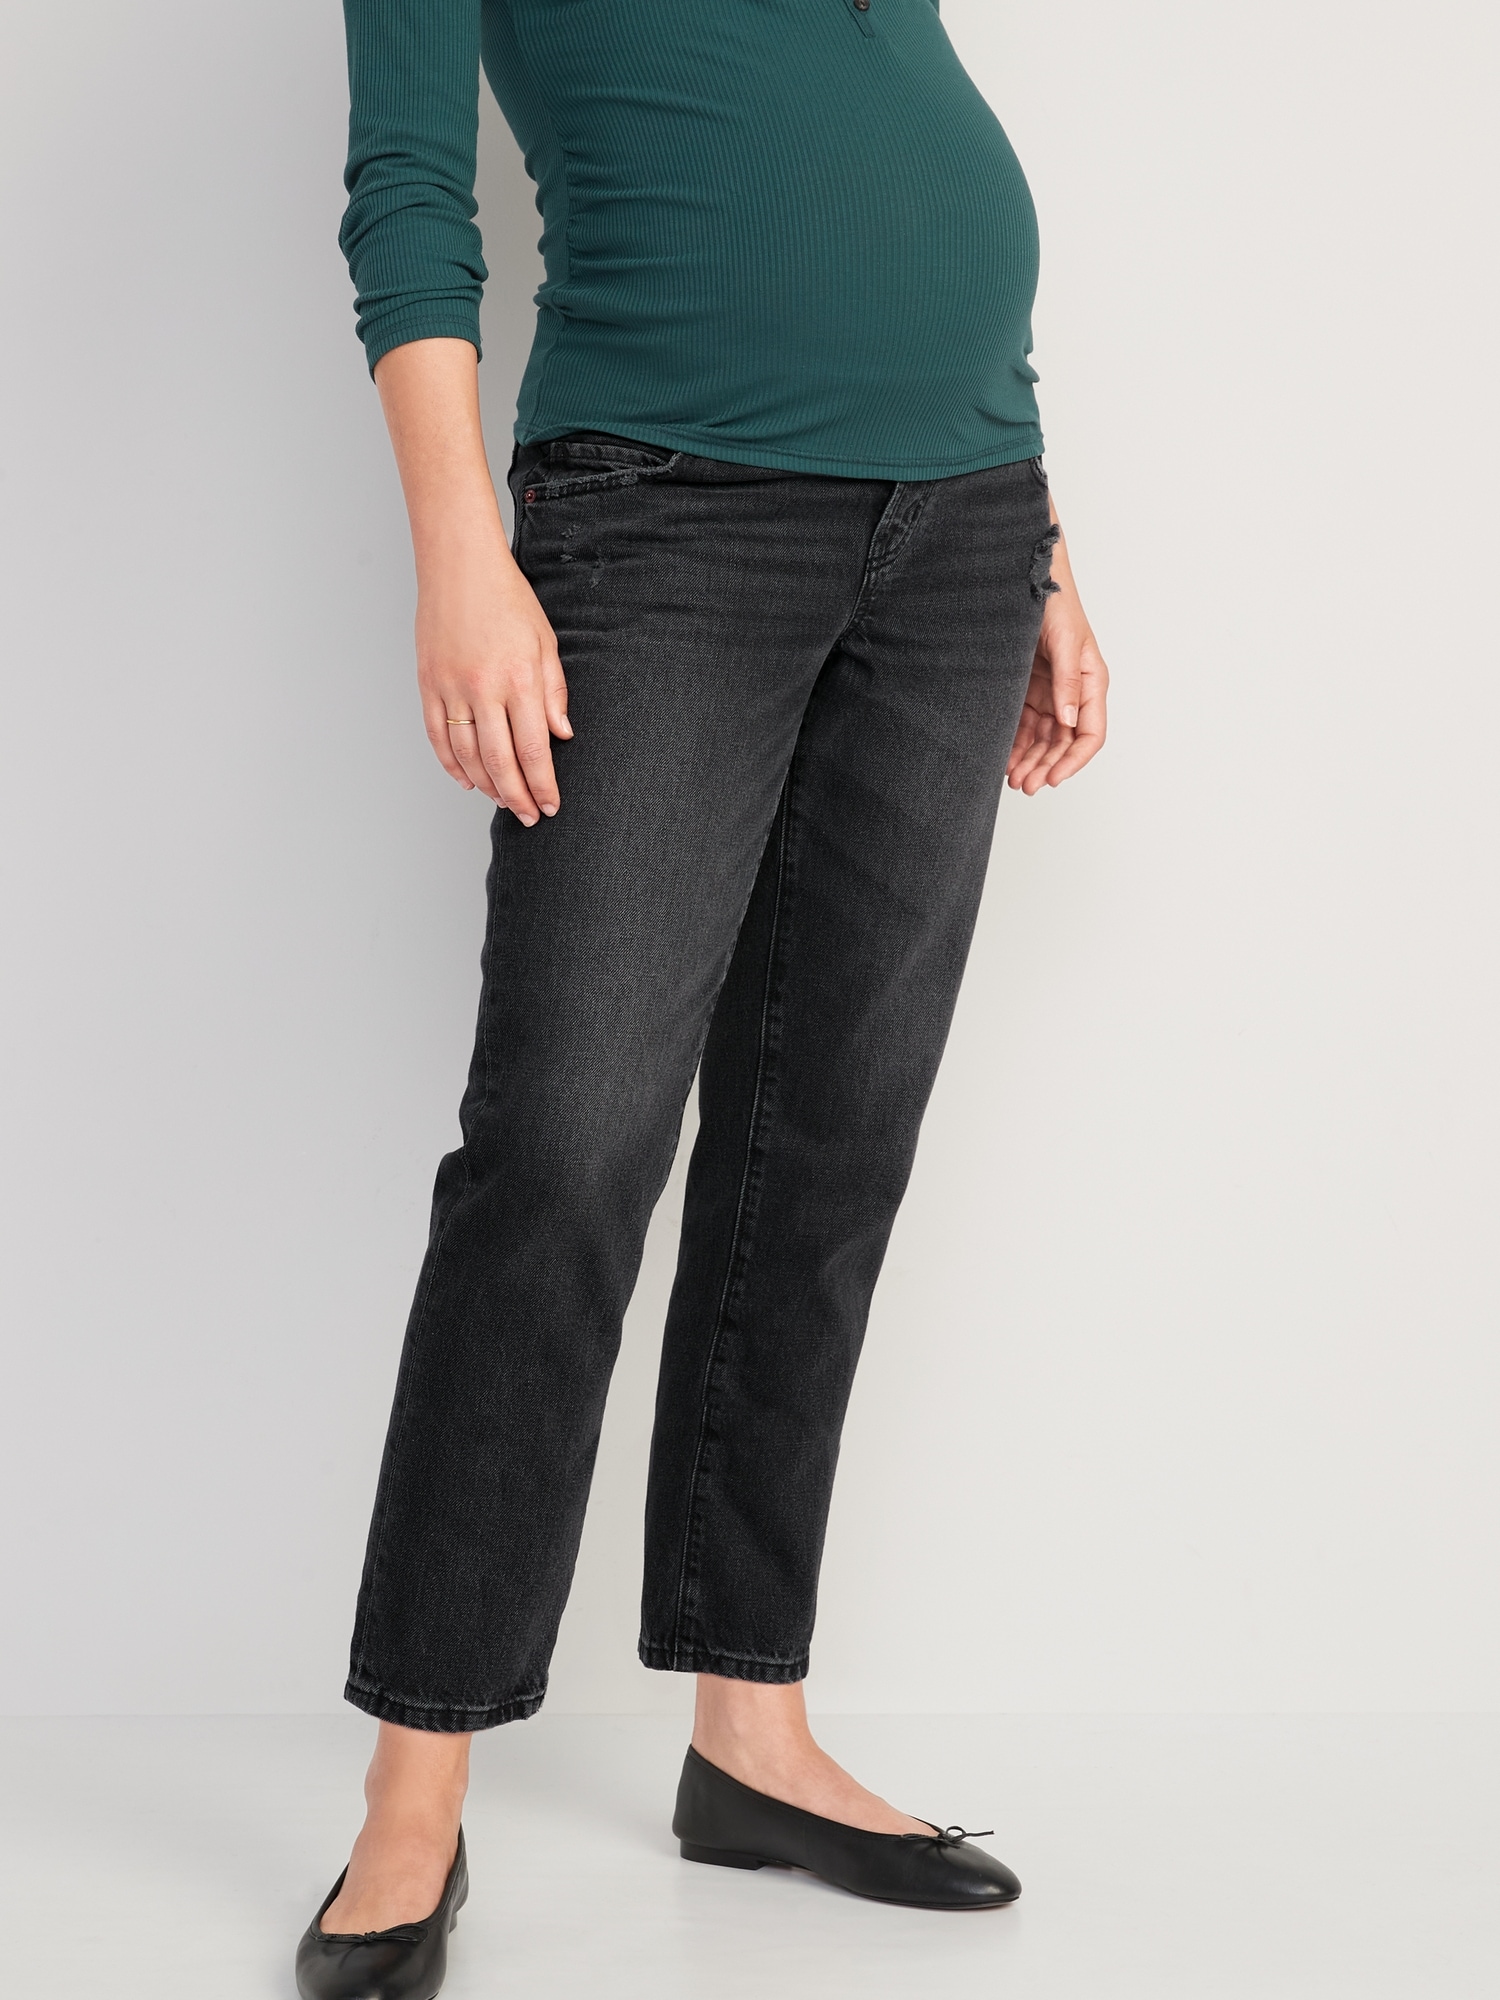 Maternity Front Low Panel Slouchy Straight Black Jeans